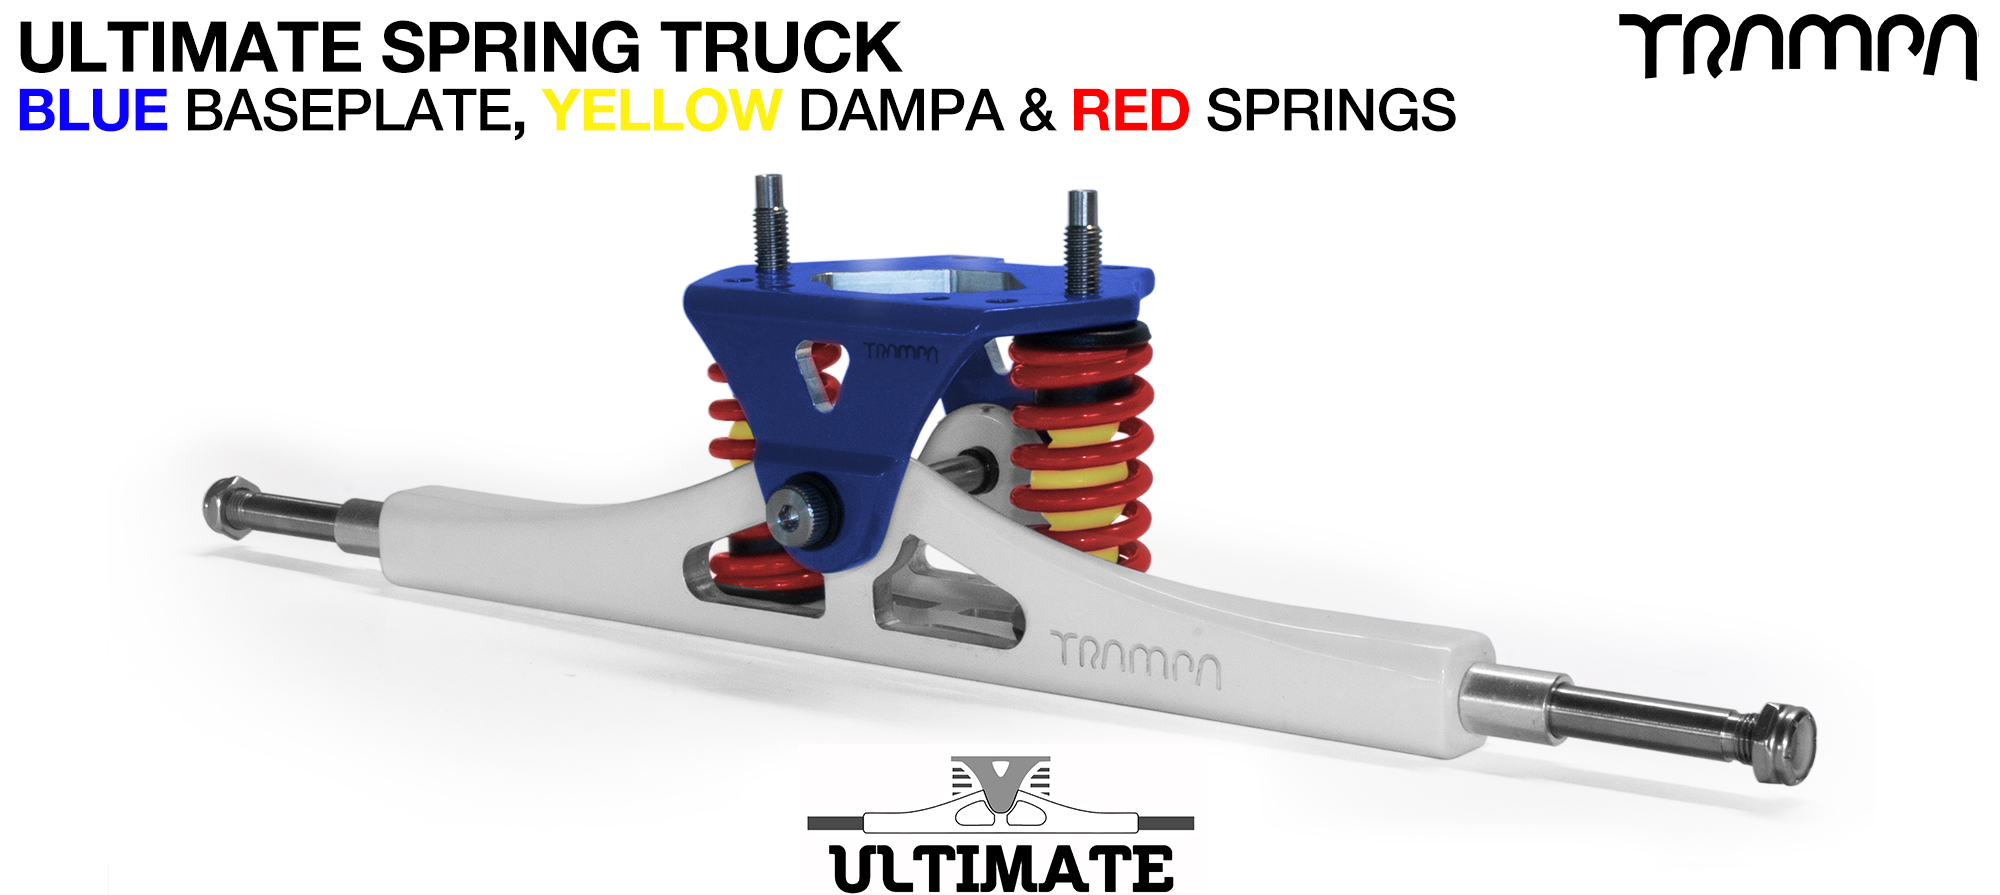 ULTIMATE ATB TRUCK - WHITE ATB Hanger with TITANIUM Axles & Kingpin & NAVY Baseplate 